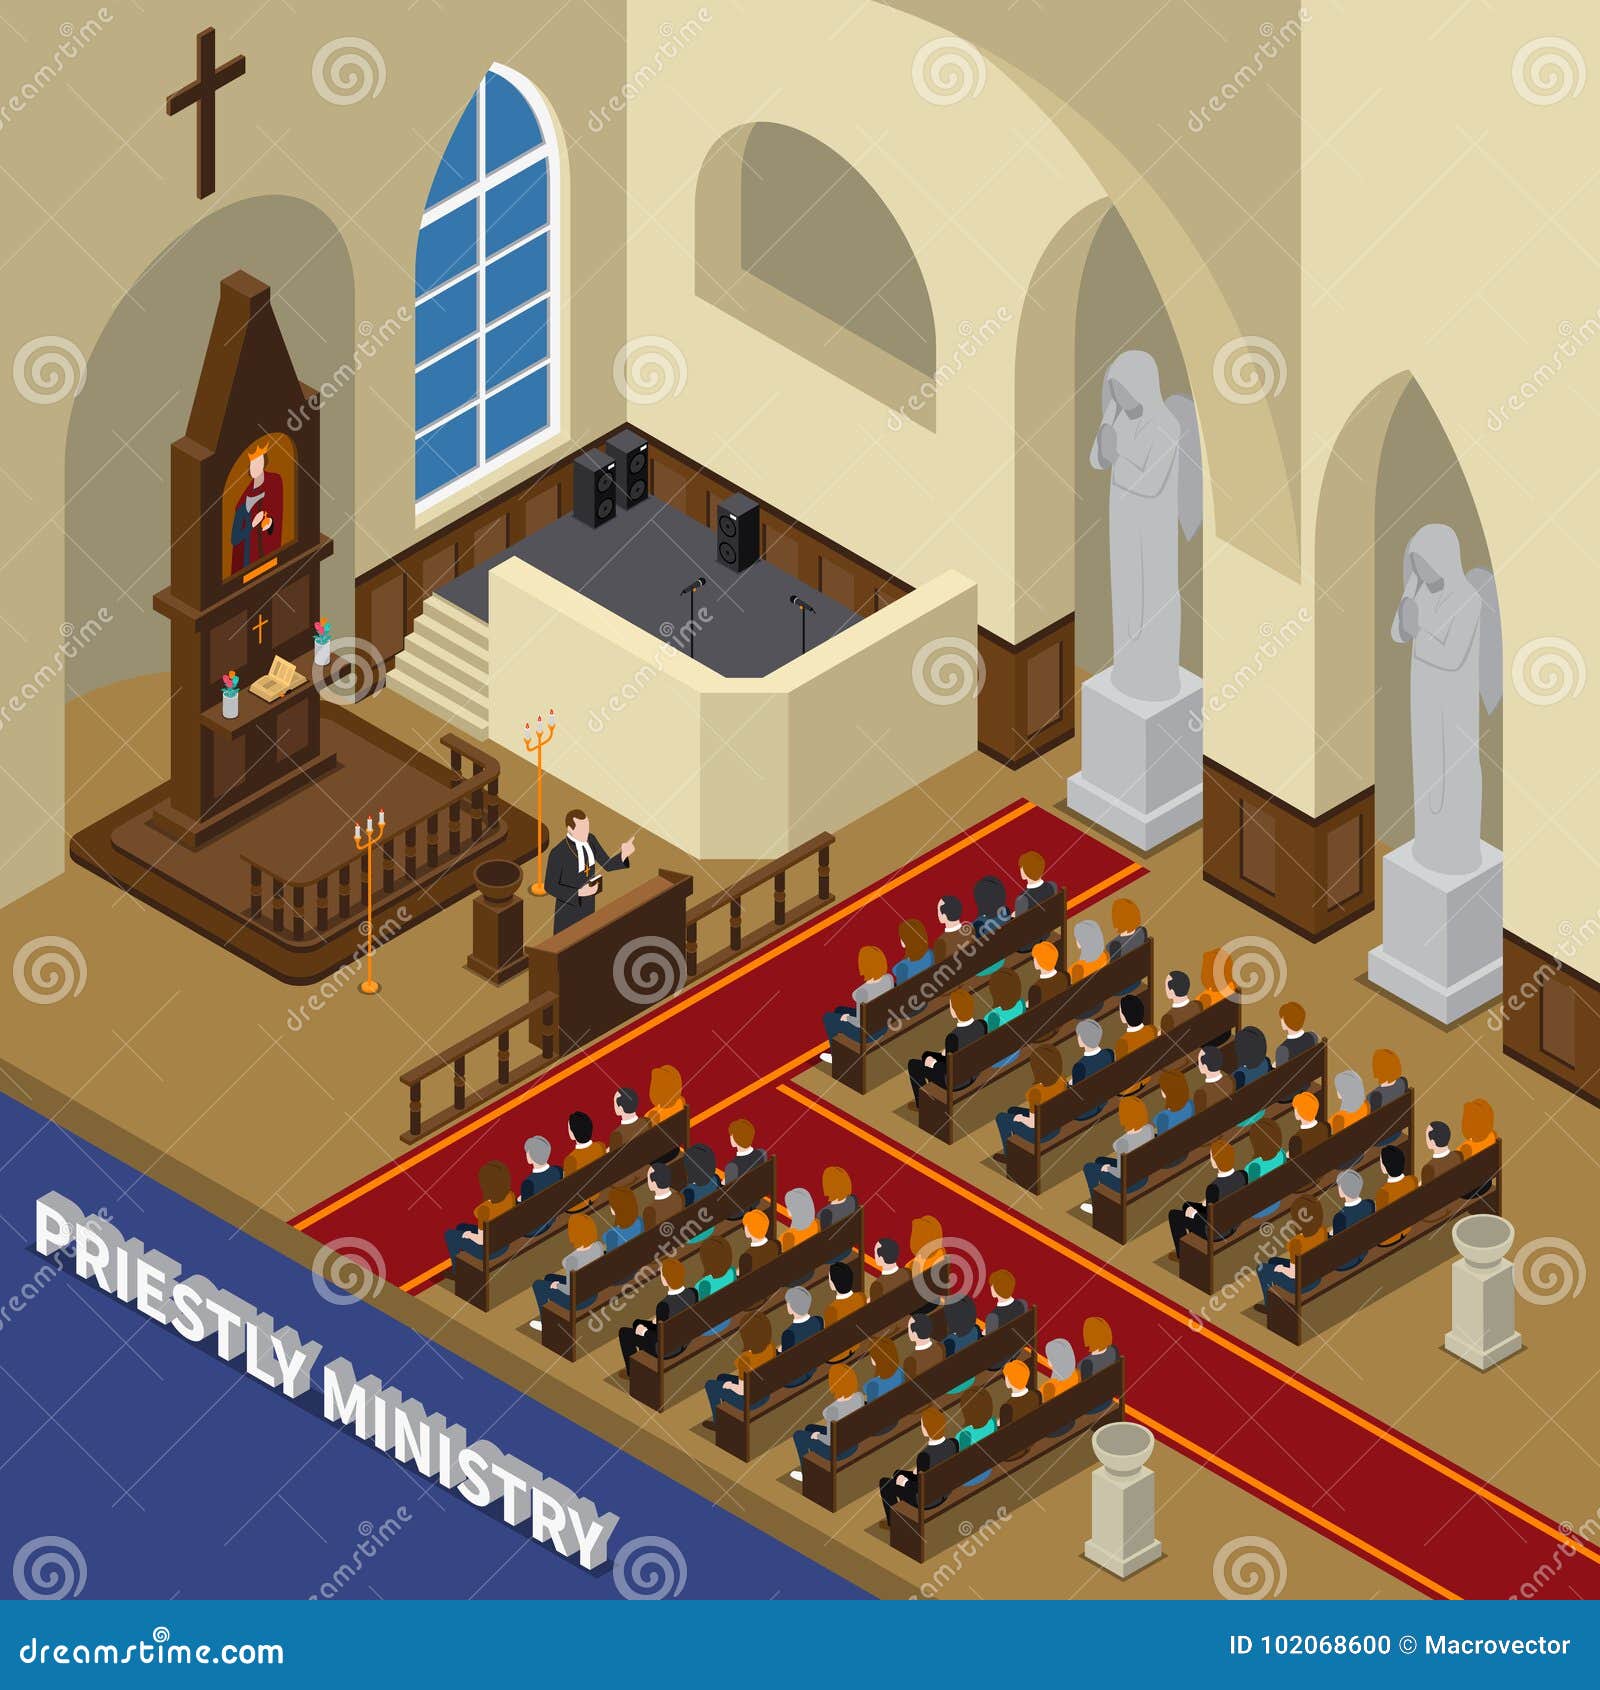 priestly ministry isometric composition